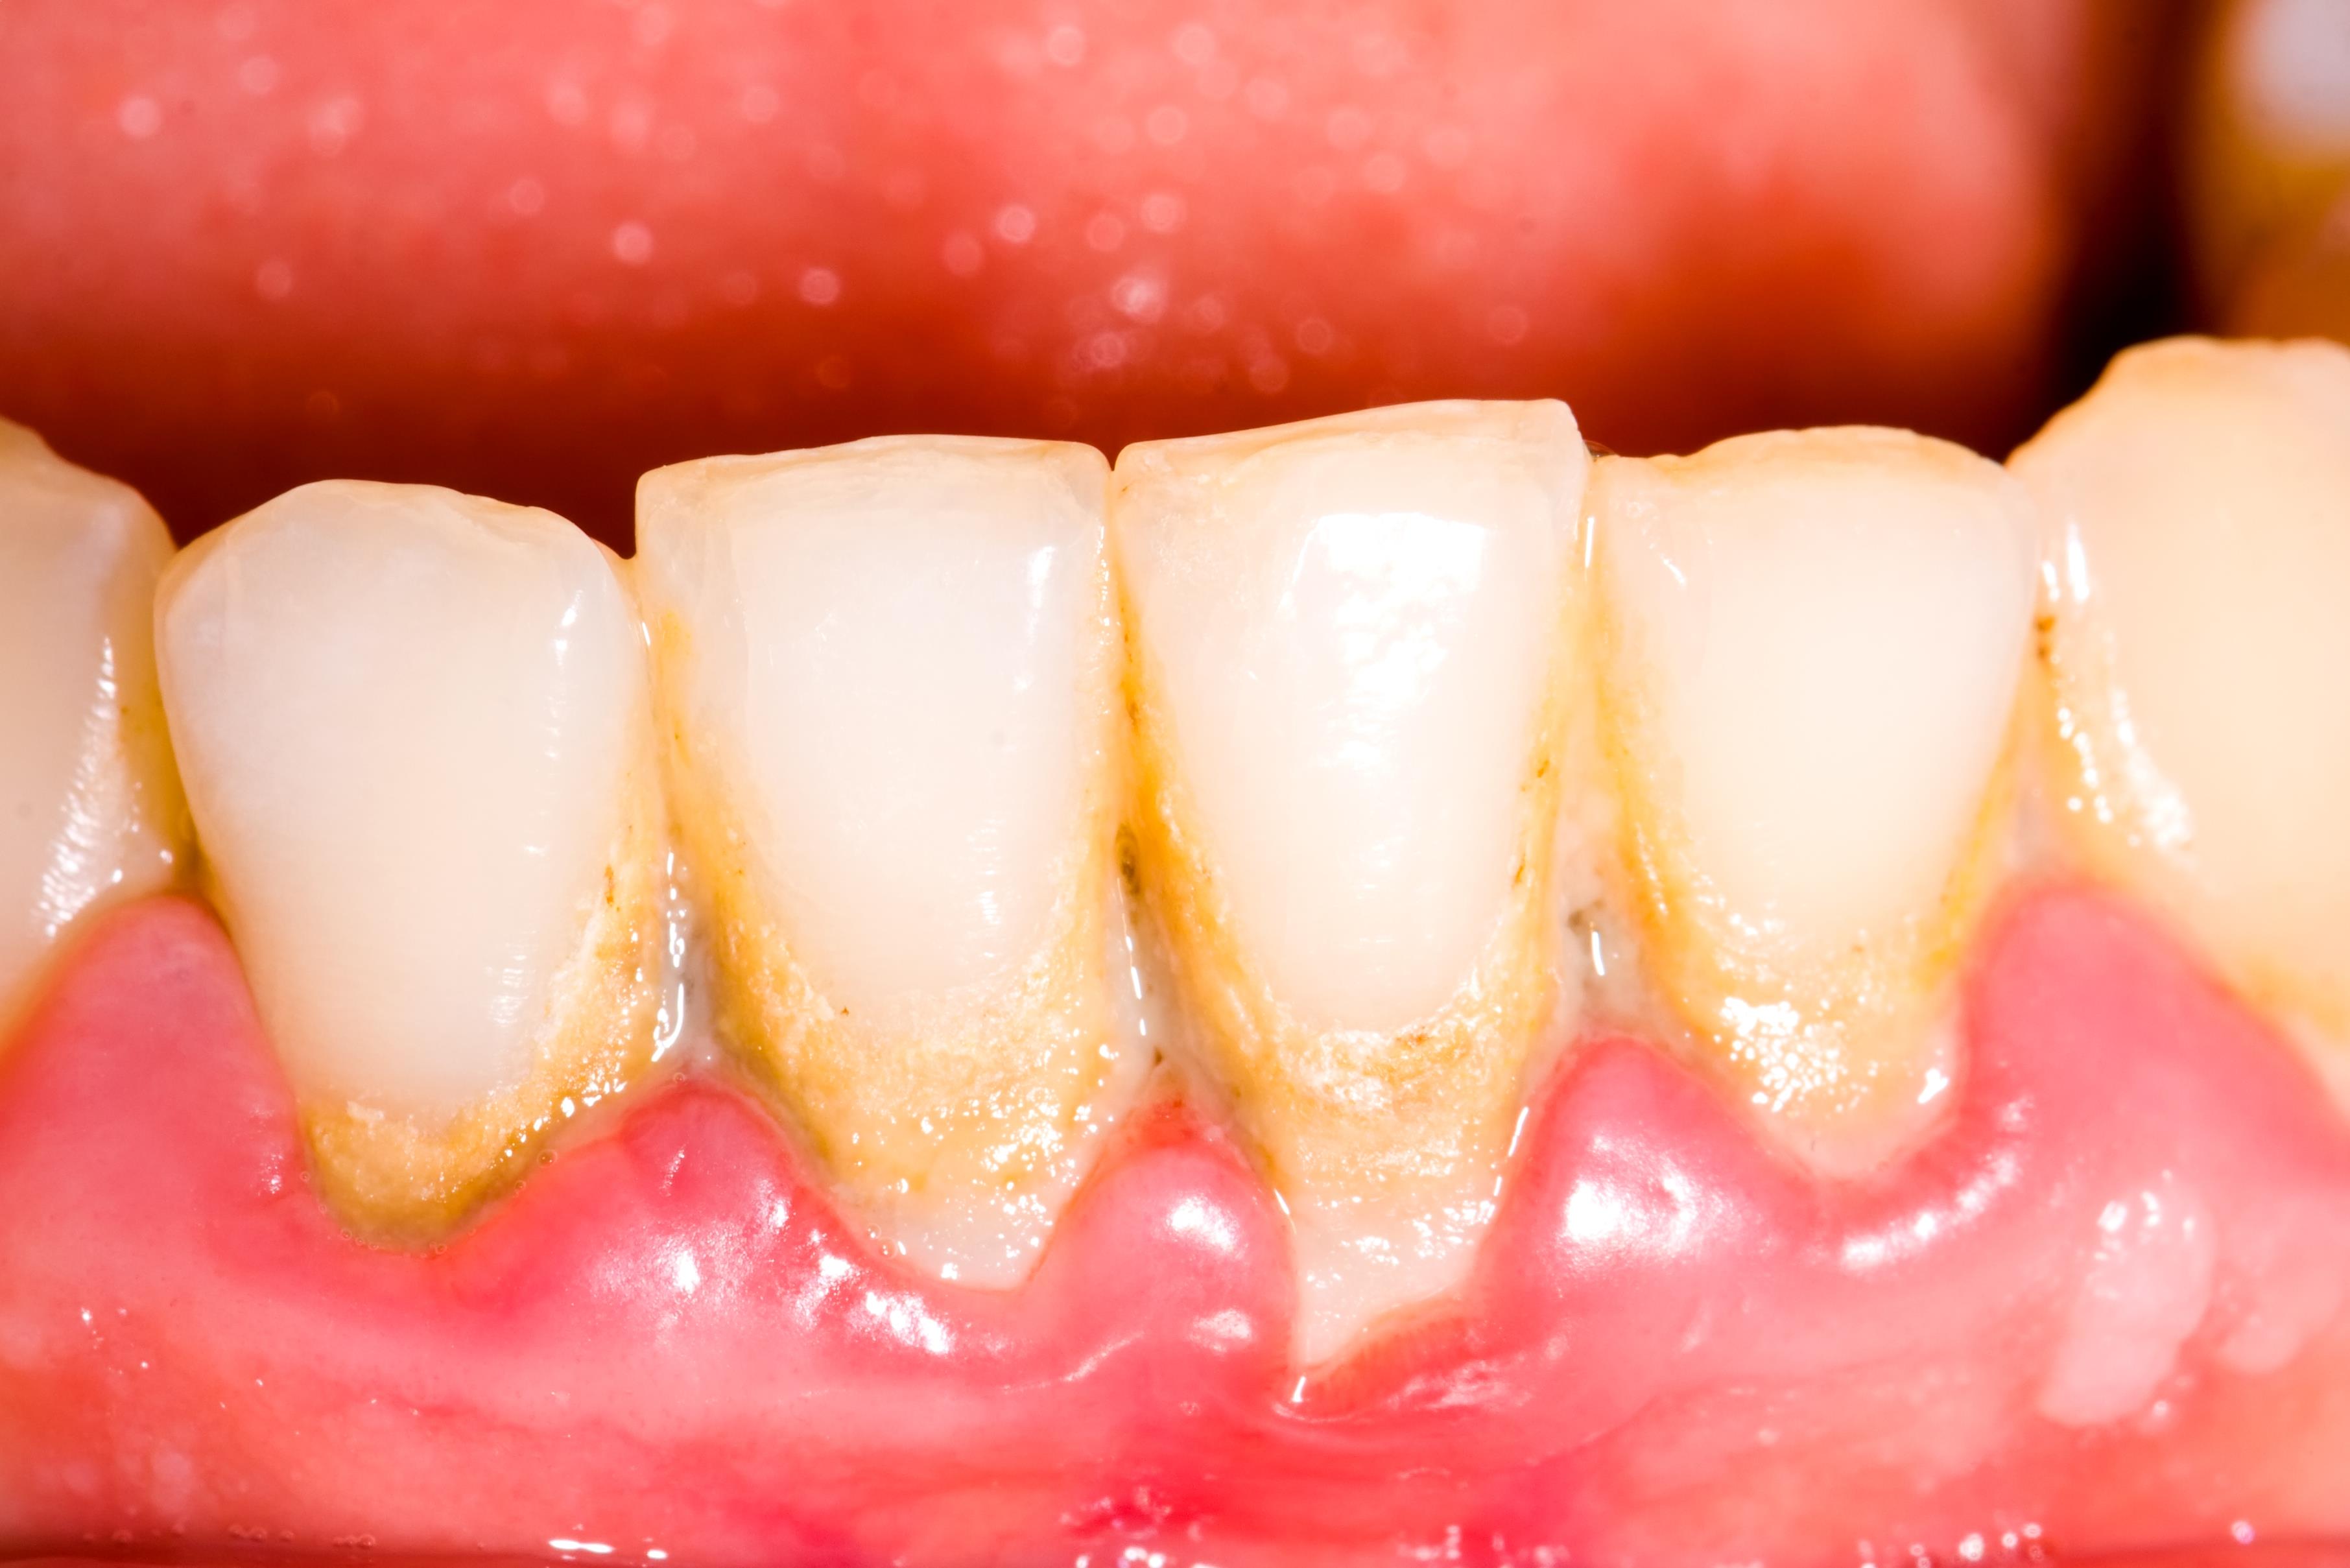 Dental Plaque  What Problems Can it Lead to?